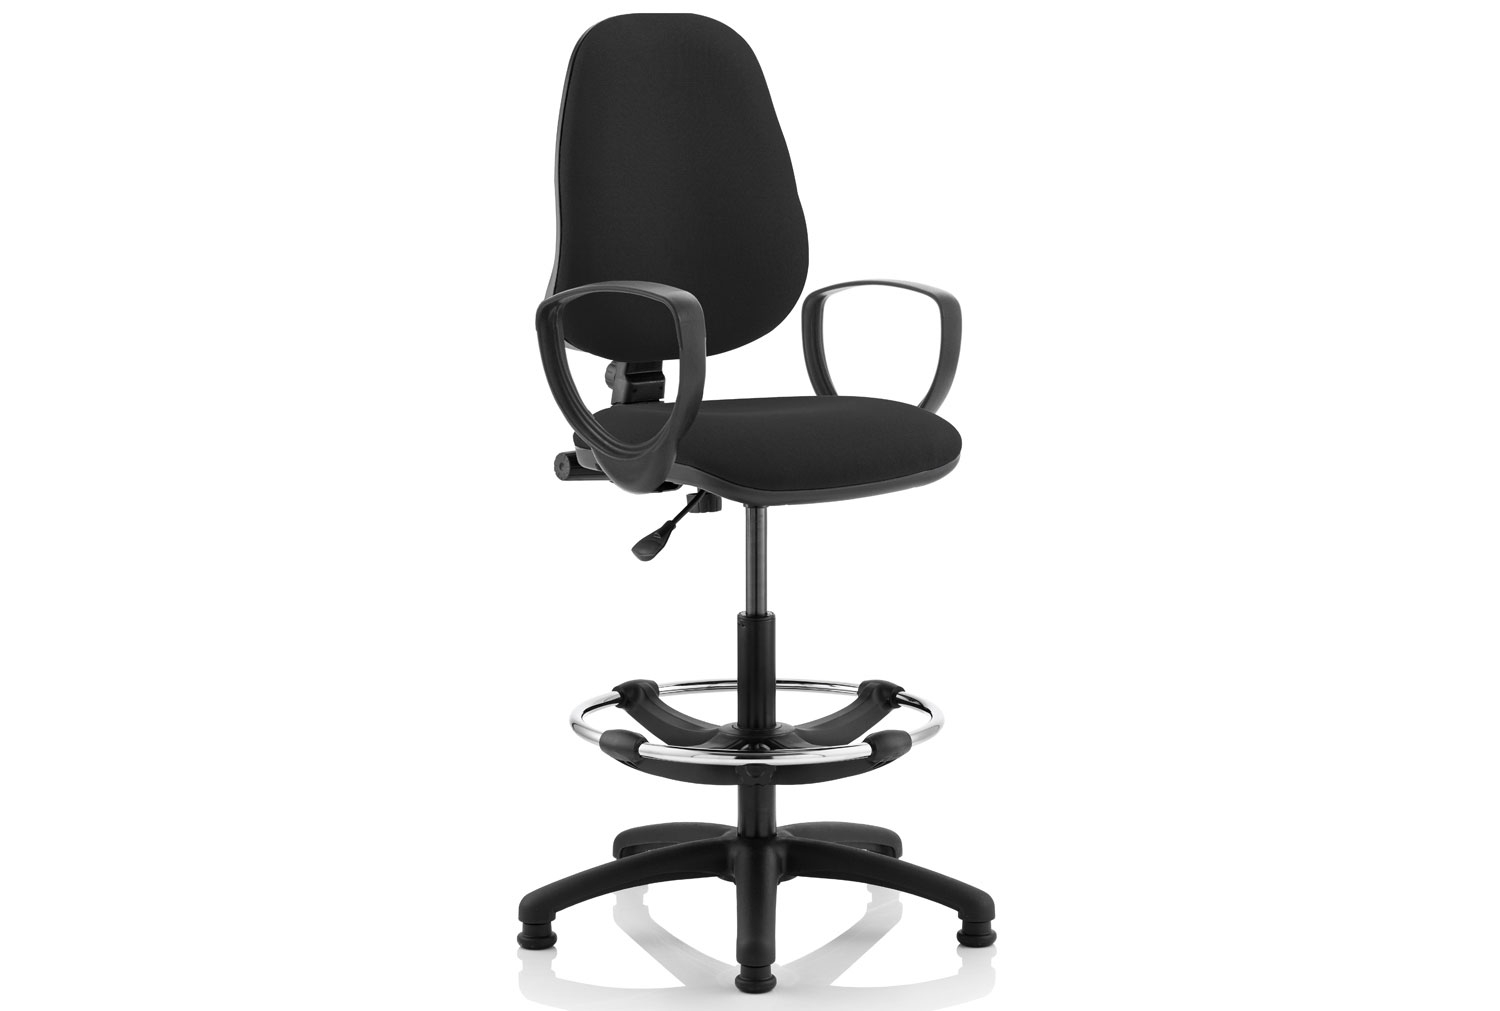 Lunar 1 Lever Draughtsman Office Chair (Fixed Arms), Black, Express Delivery